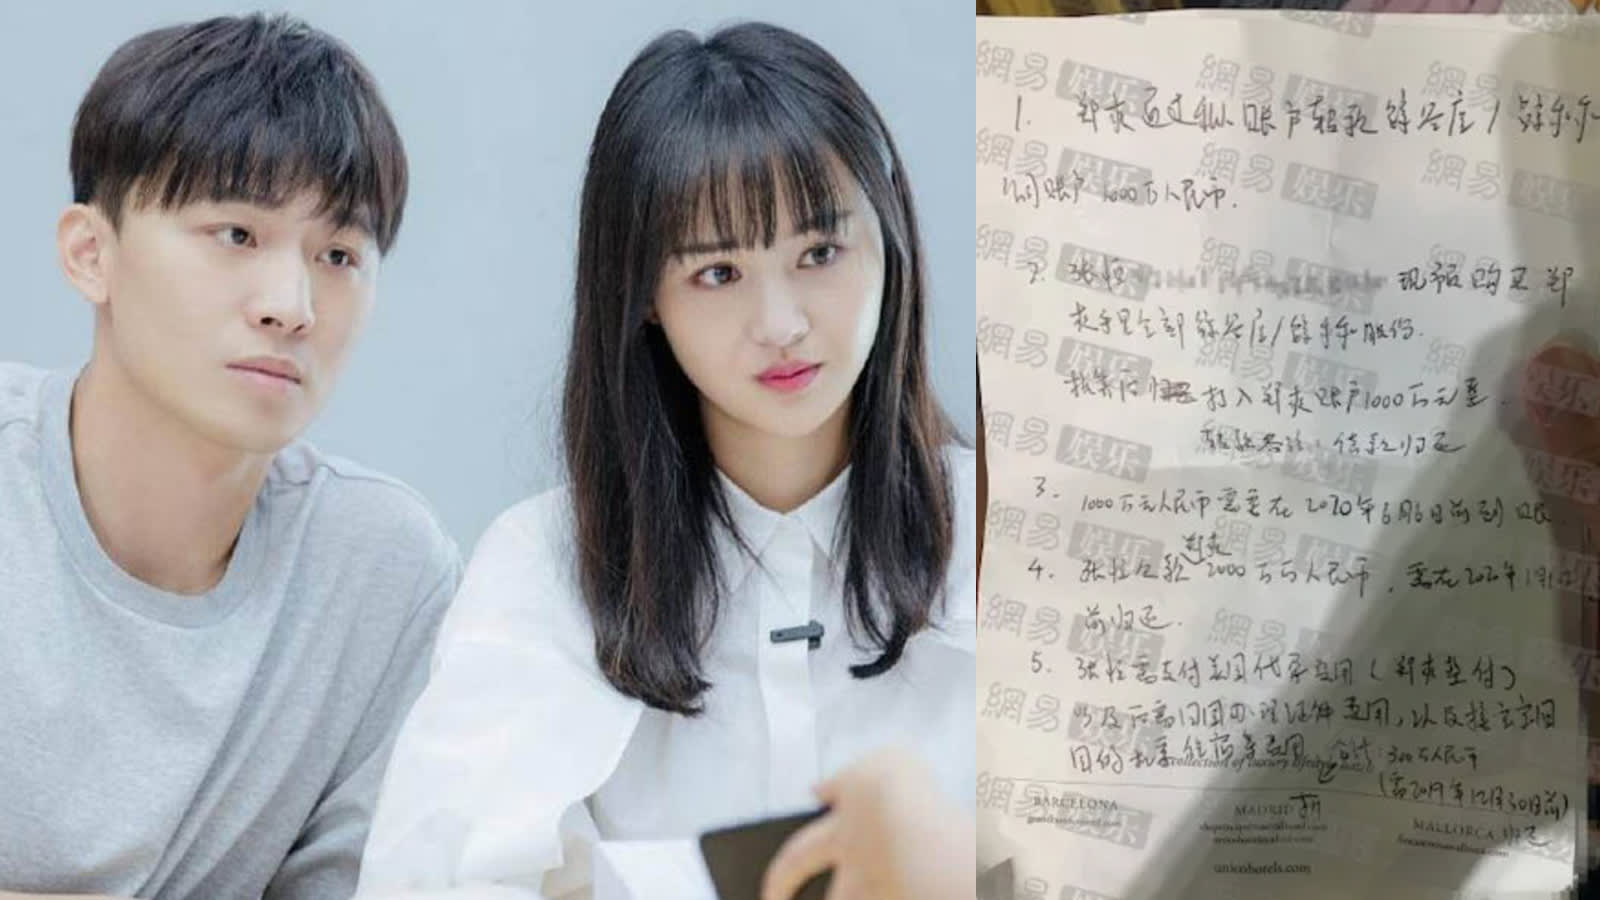 Zhang Heng’s Father Reveals Zheng Shuang’s Handwritten Contract Which Had 15 Demands, Most Of Which Involved Money